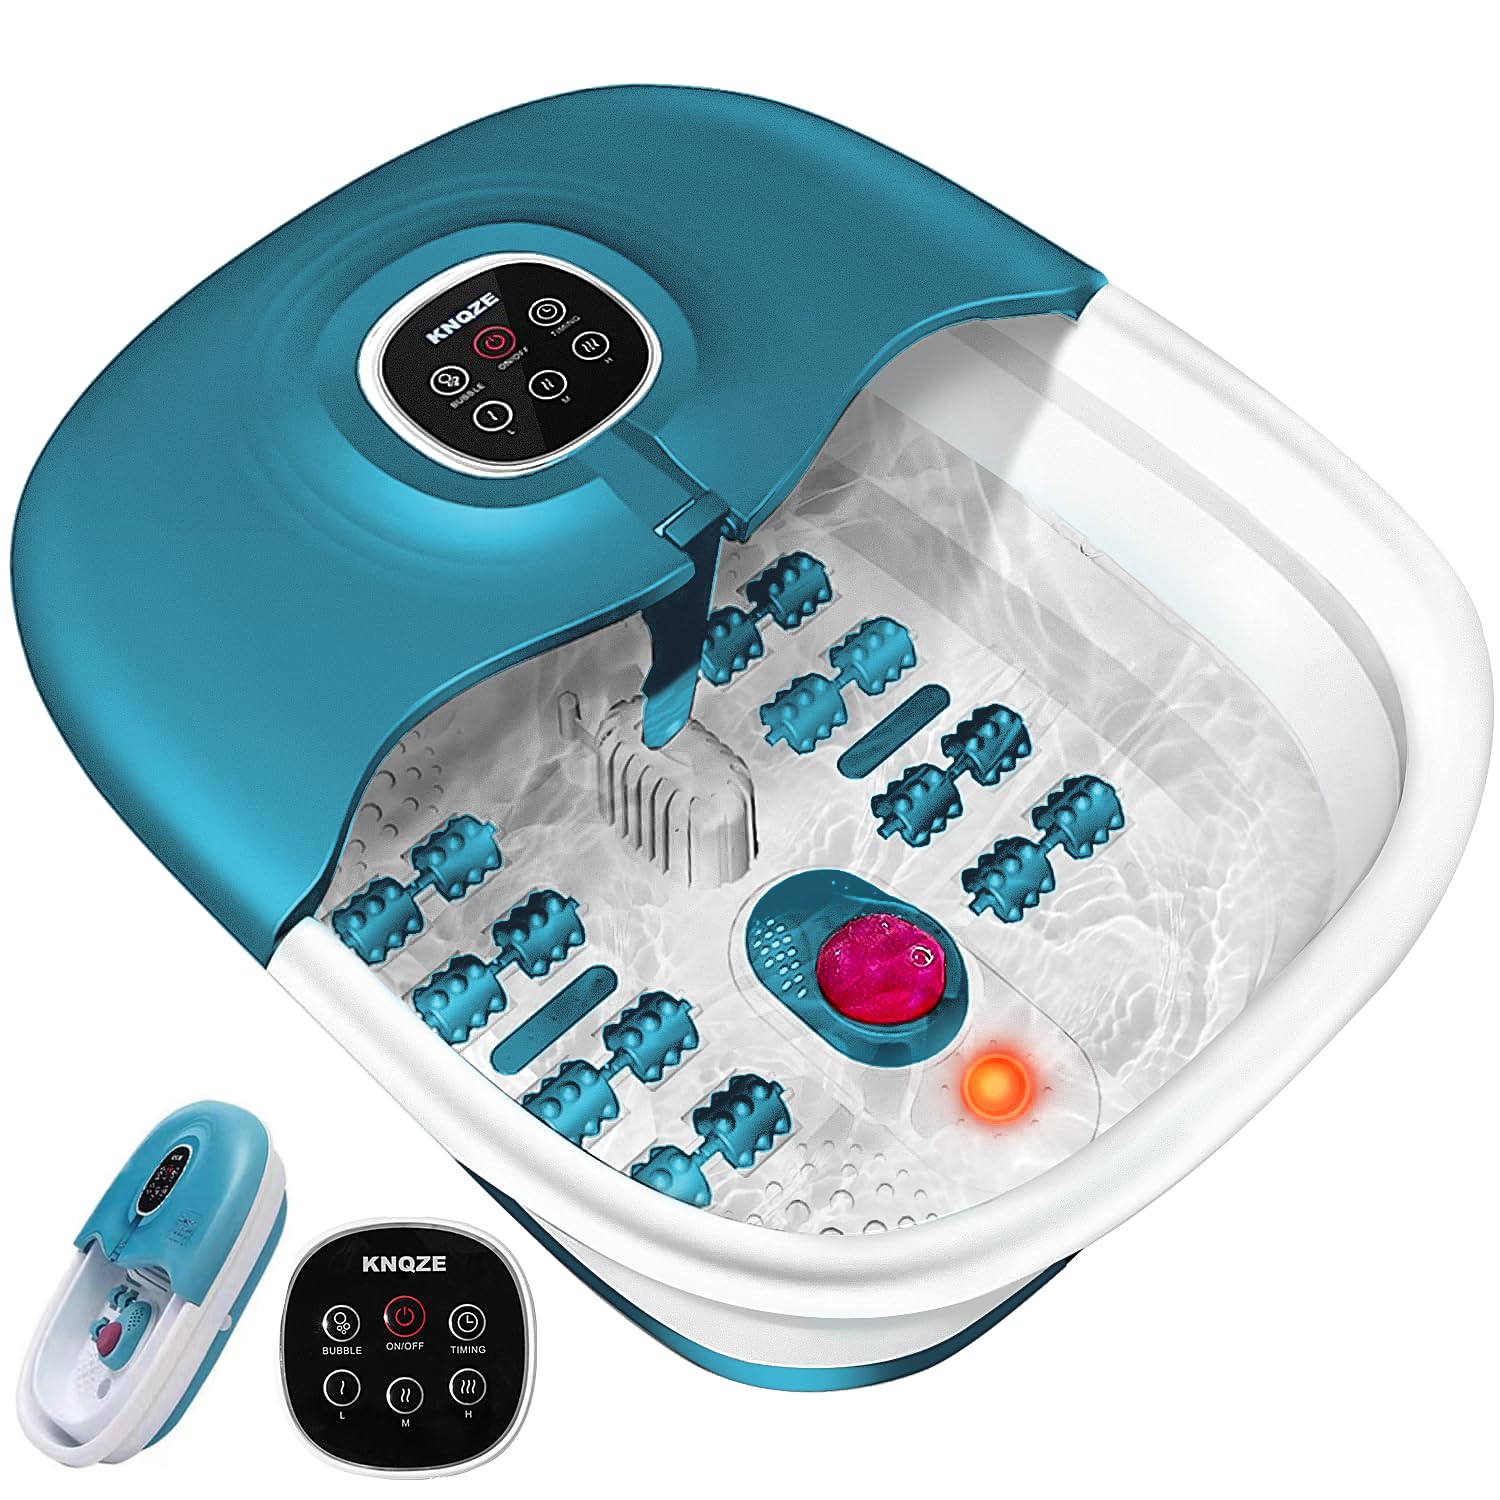 Collapsible Foot Spa Bath with Heat, Remote Control, Temperature Control, Bubbles, Red Light, Pumice Stone, 16 Massage Roller Pedicure Foot Spa Tub Foot Soaker for Soothe & Relax Tired Feet -Blue